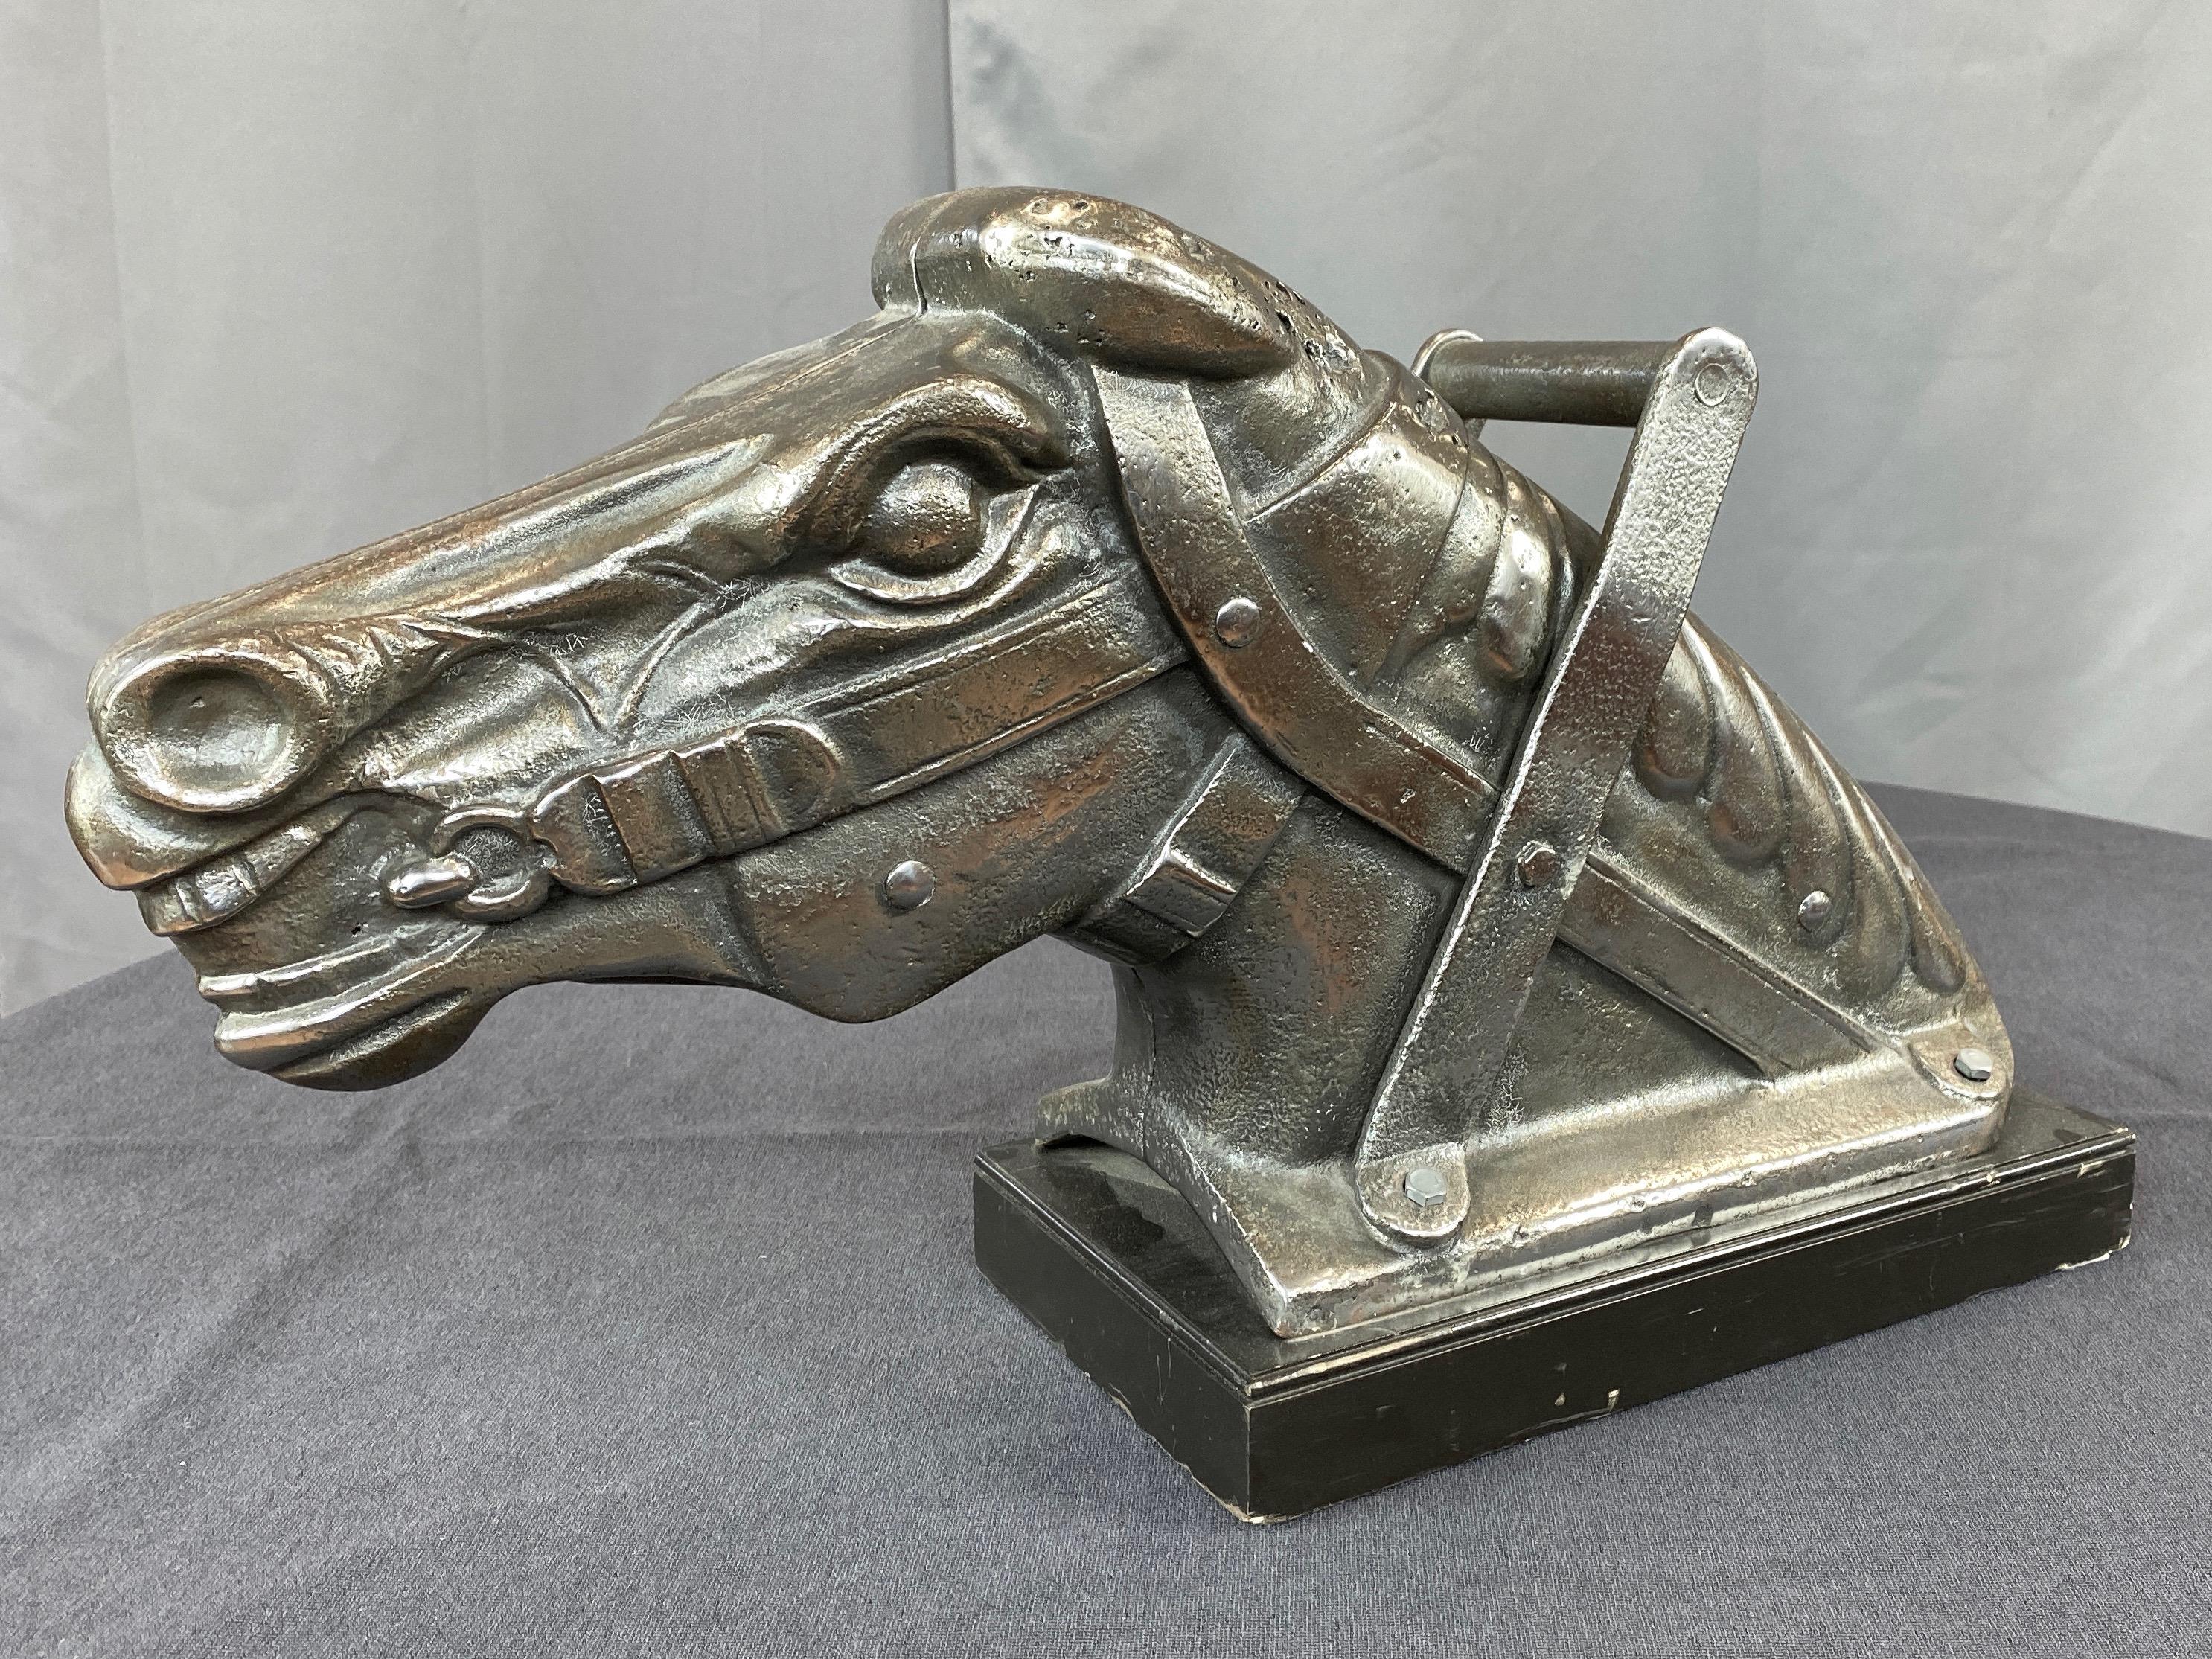 An impressive and uncommon polished cast iron horse head from a circa 1930s carnival kiddie ride or carousel.

Wonderfully expressive sculpt captures your noble steed at full gallop, with eyes ablaze, nostrils flared, and teeth bared as it strains